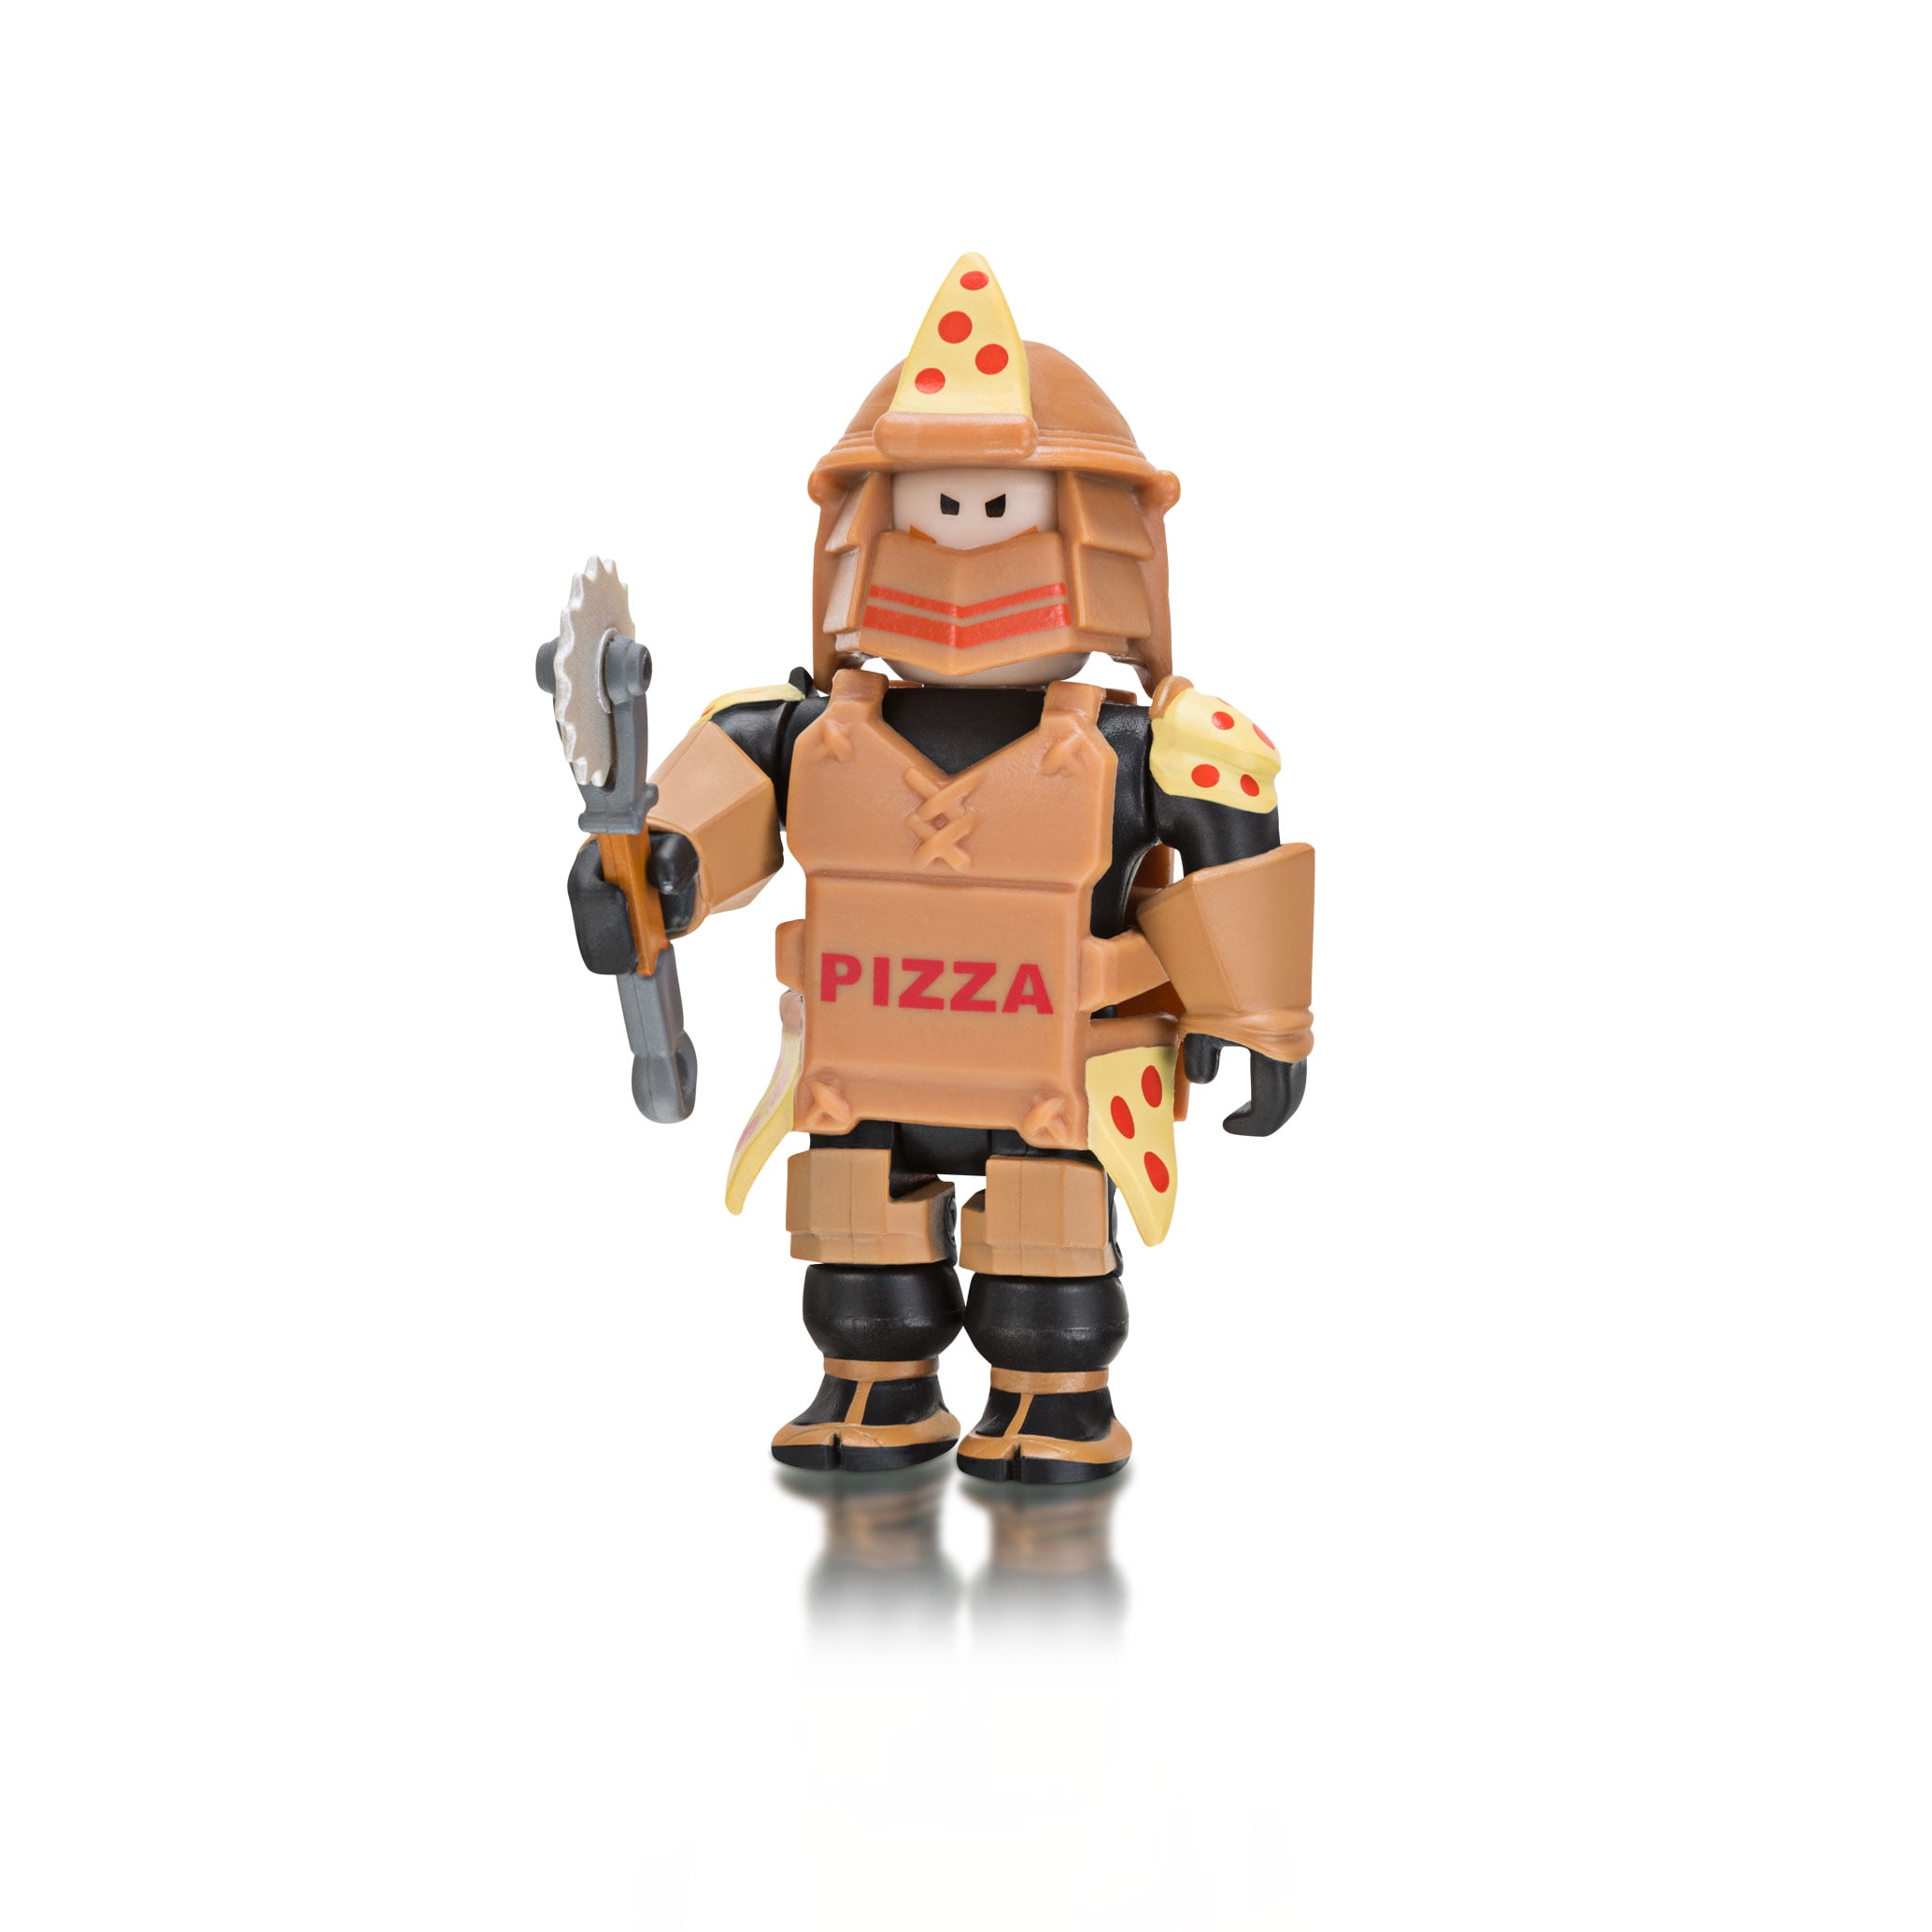 Roblox Loyal Pizza Warrior Pizza Face *Code Only Messaged* Avatar Accessory  191726004042